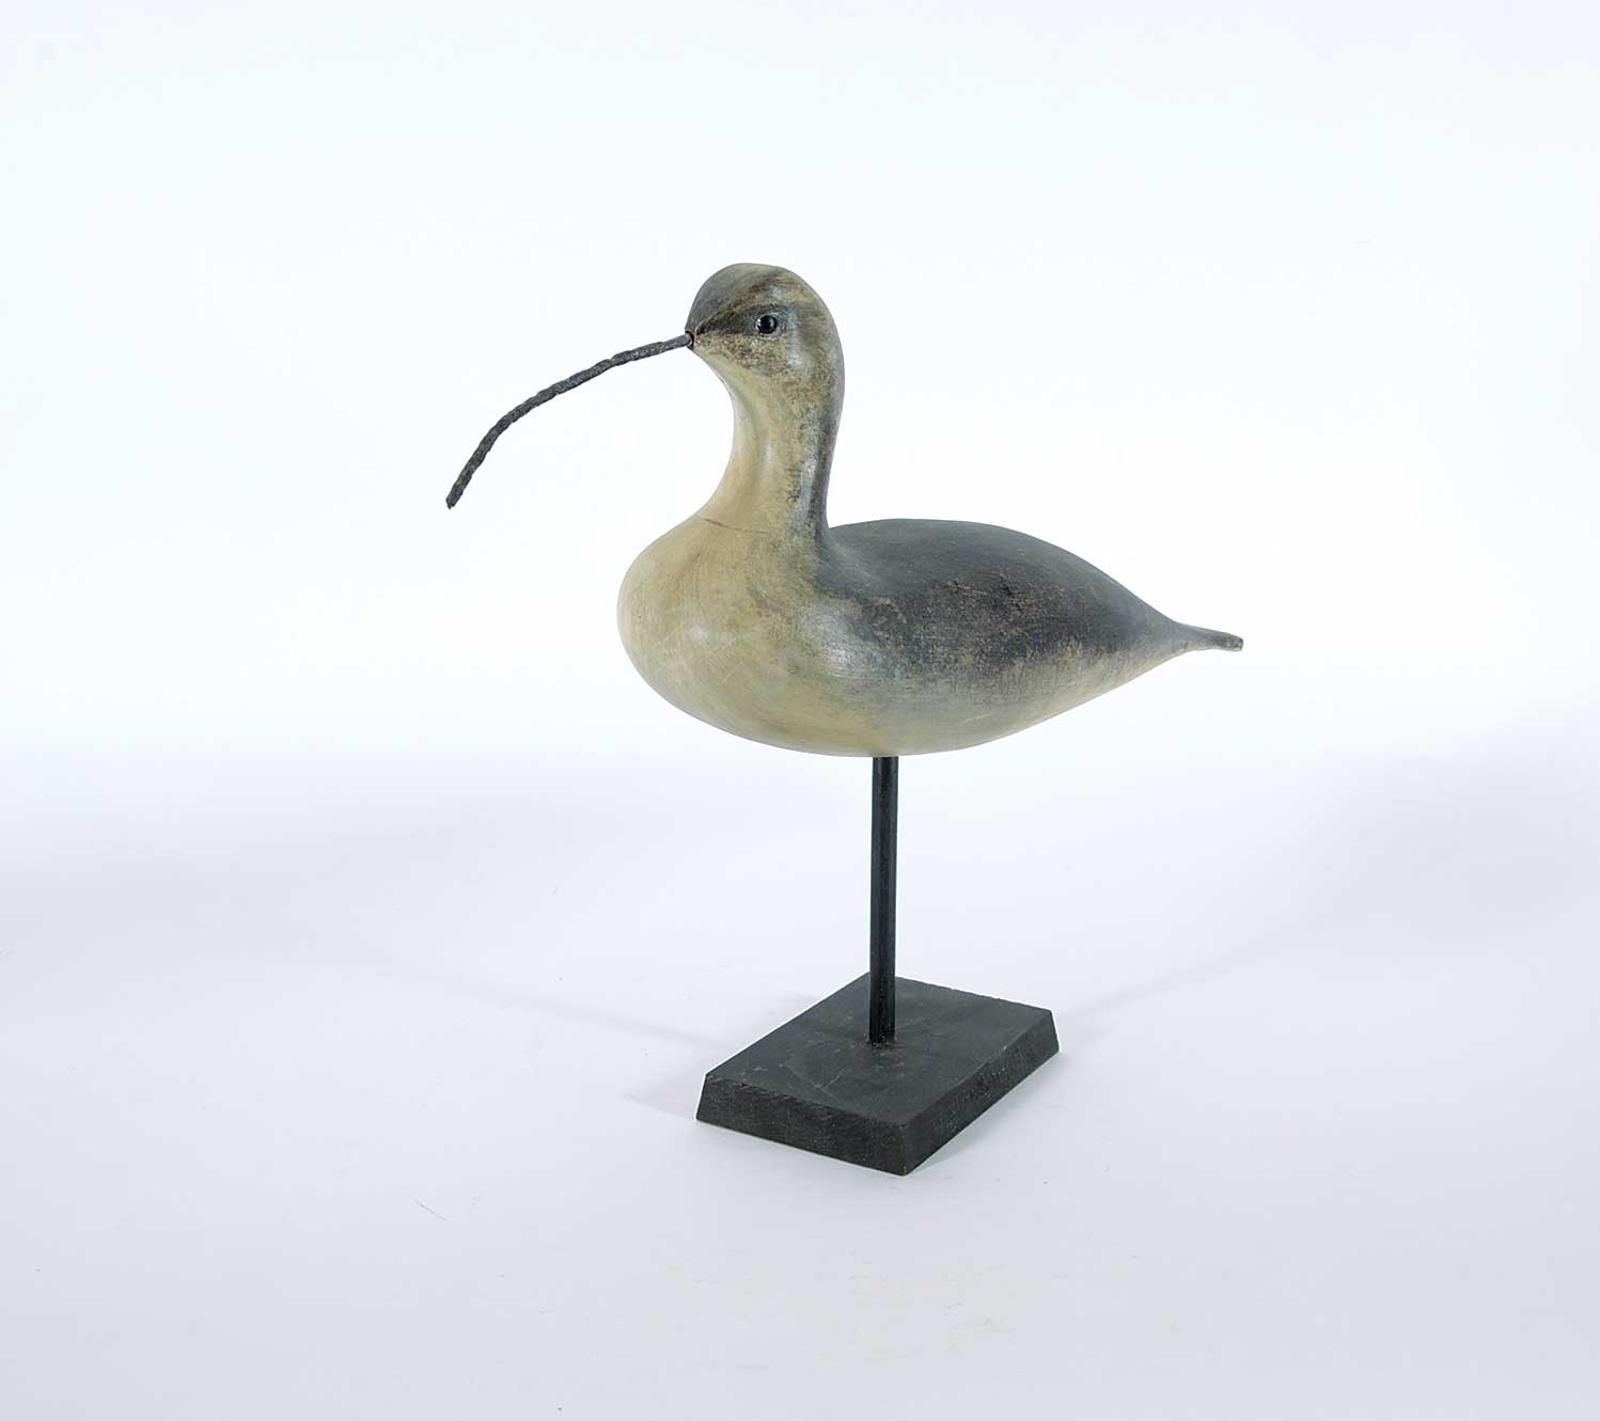 W. Townsend - Long-billed Curlew